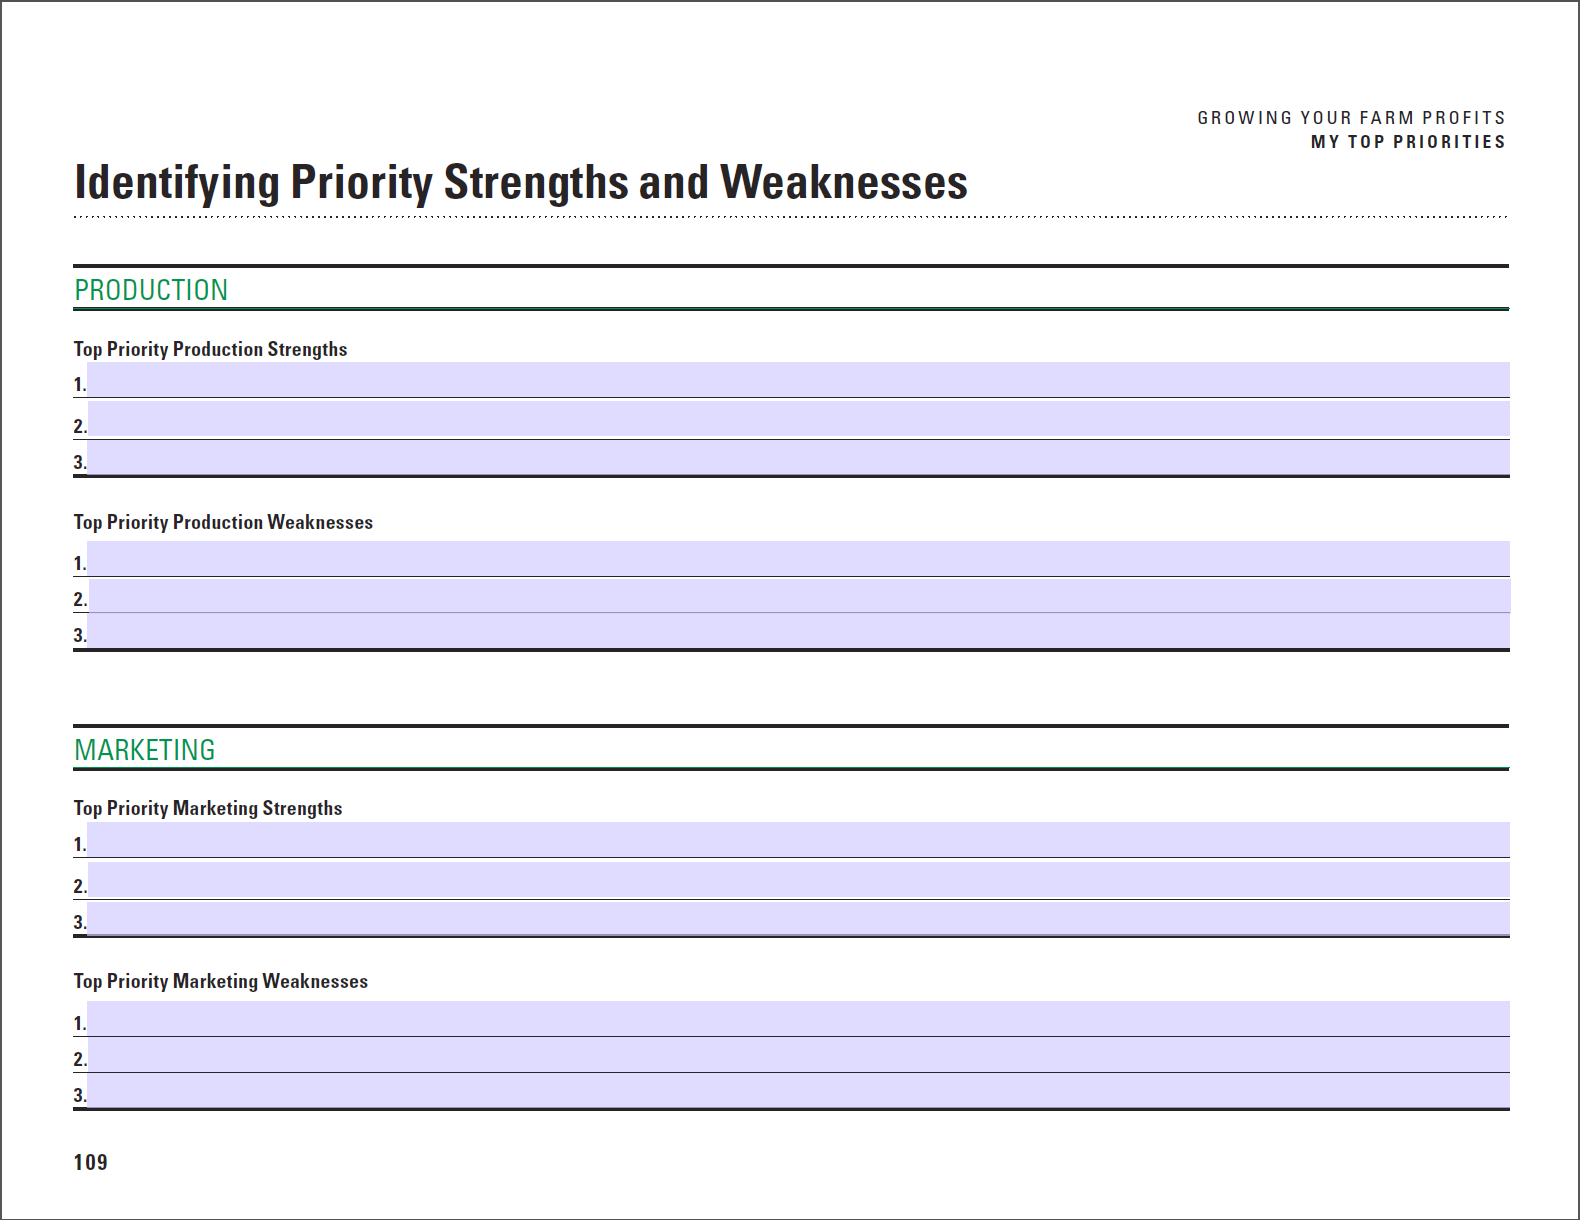 Screen capture of a fillable pdf page from My top priorities pdf.